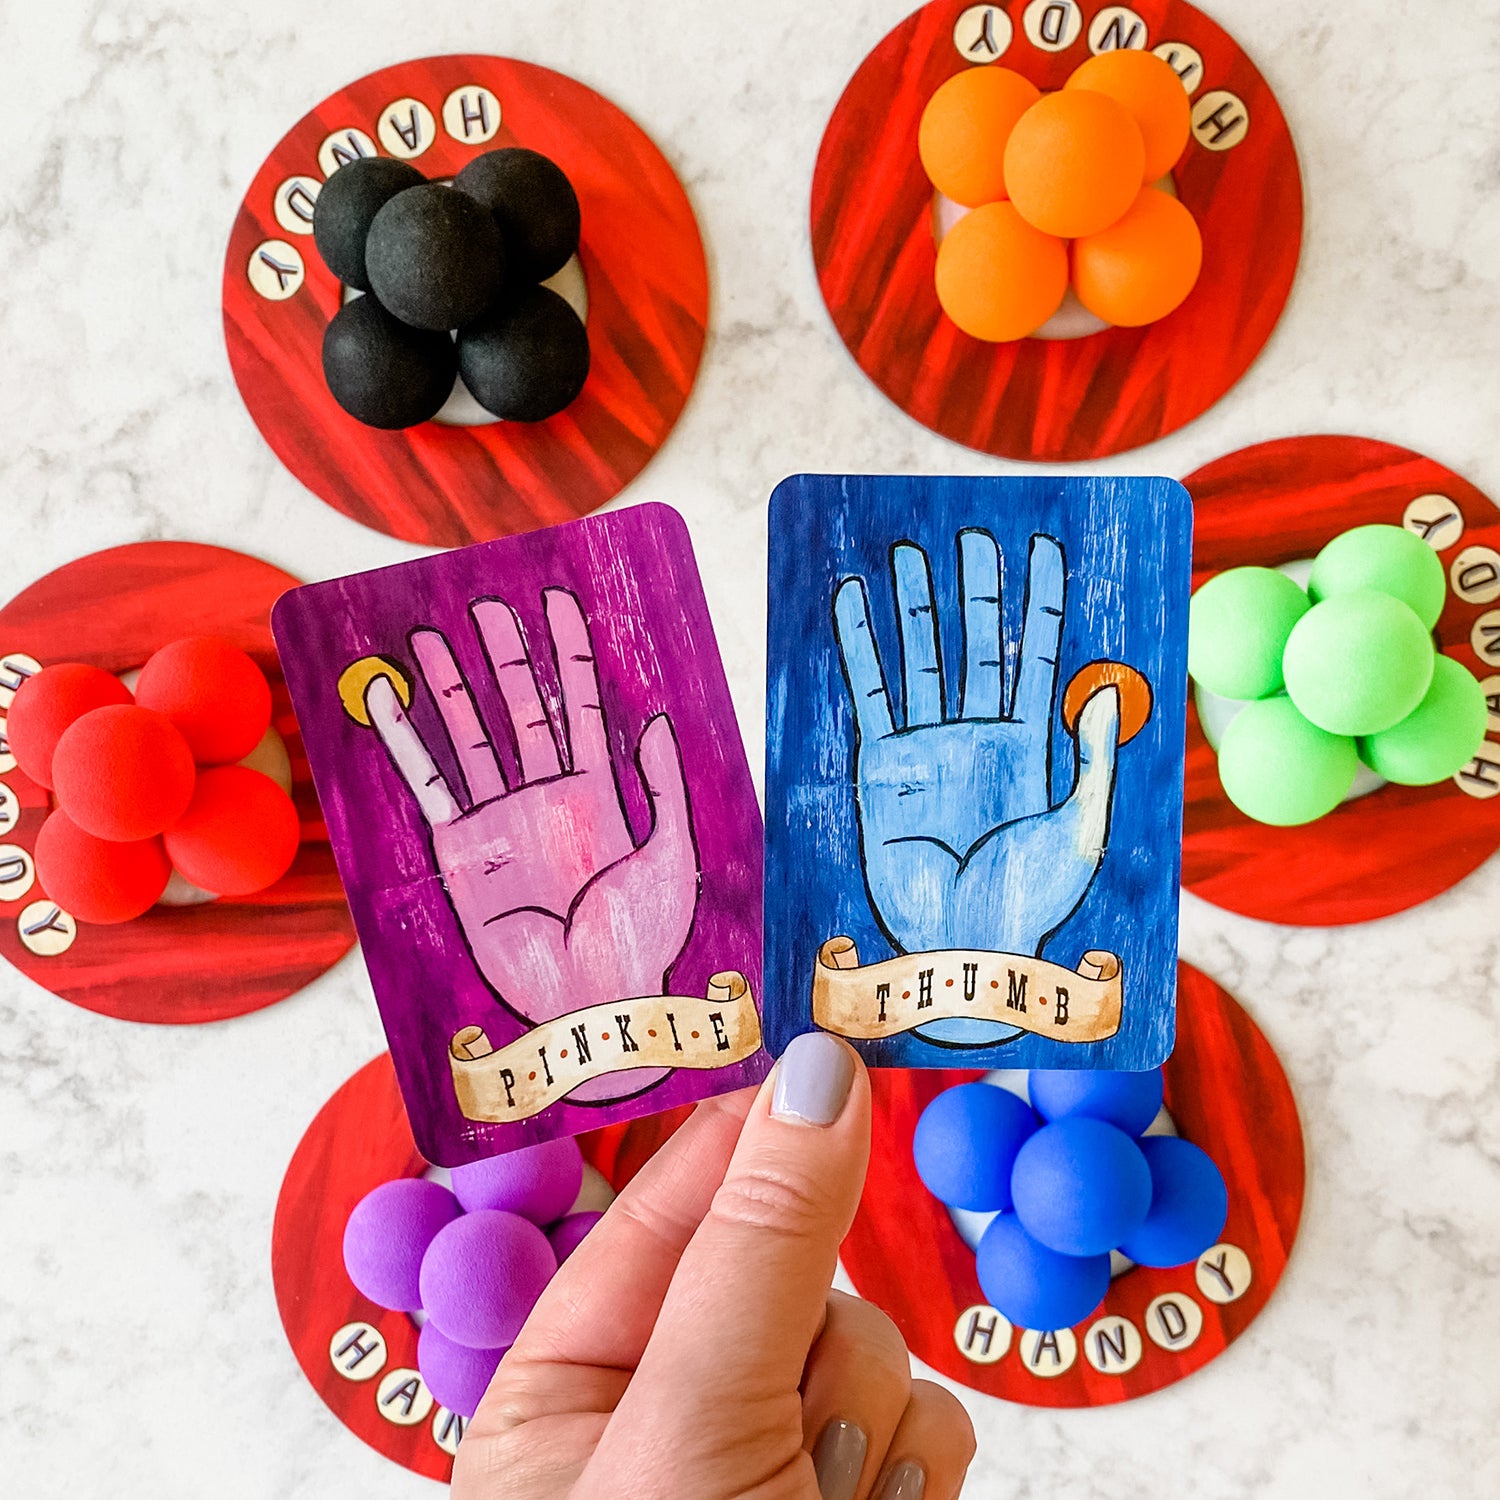 Handy by SimplyFun is a fun collaborative game focusing on fine motor skills and teamwork for ages 8 and up.